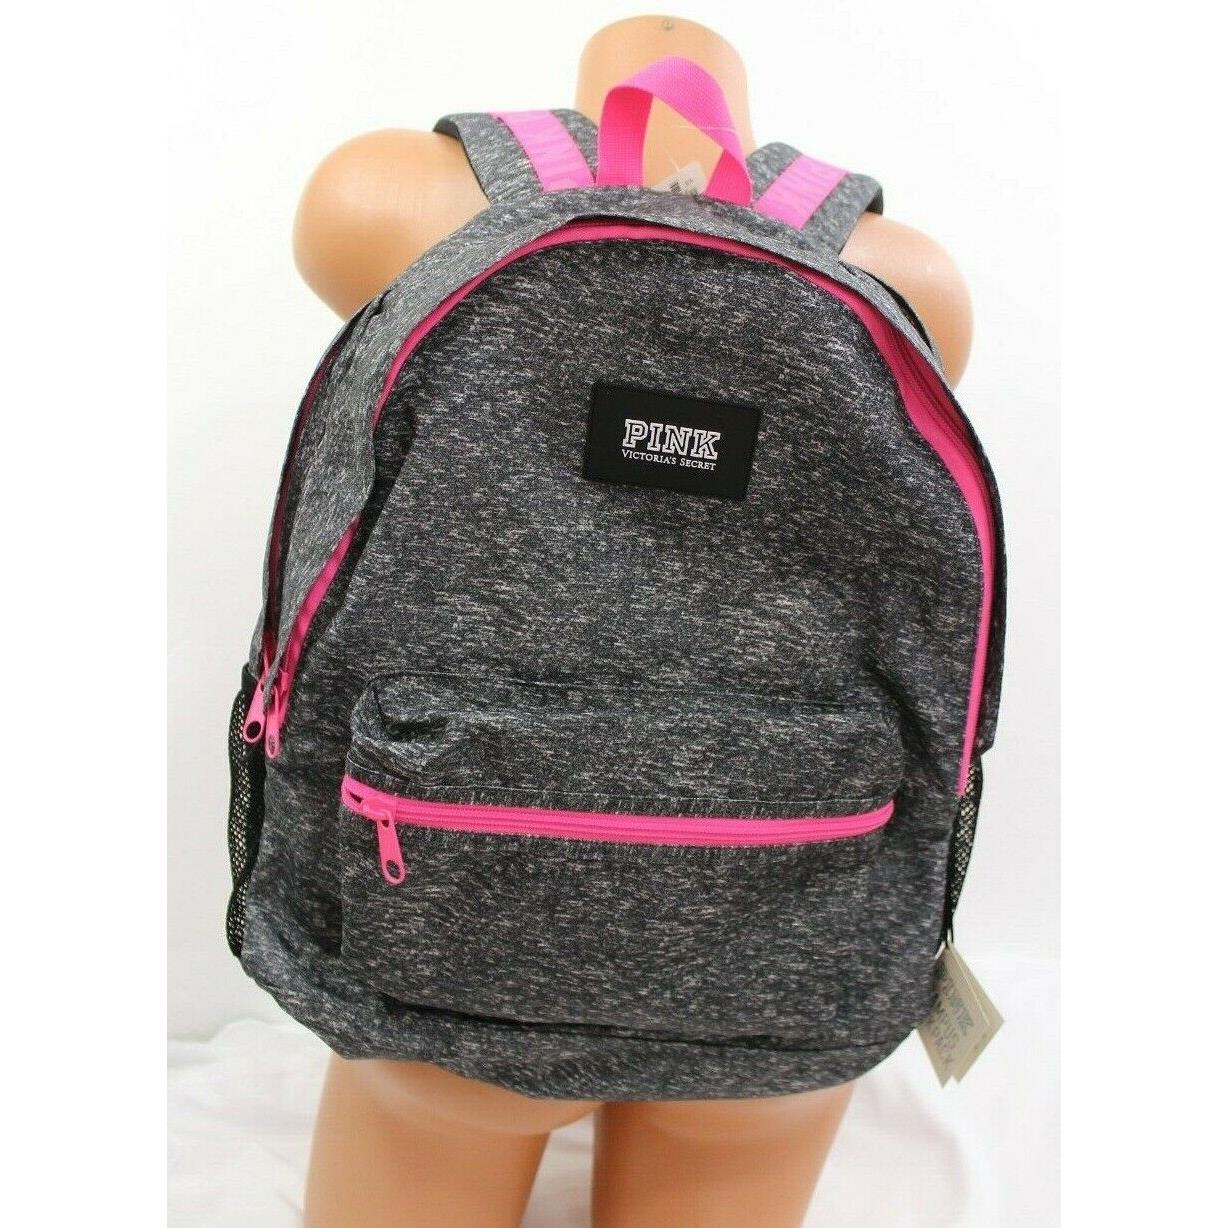 Victoria's Secret PINK Backpack NEW heathered  grey with logo